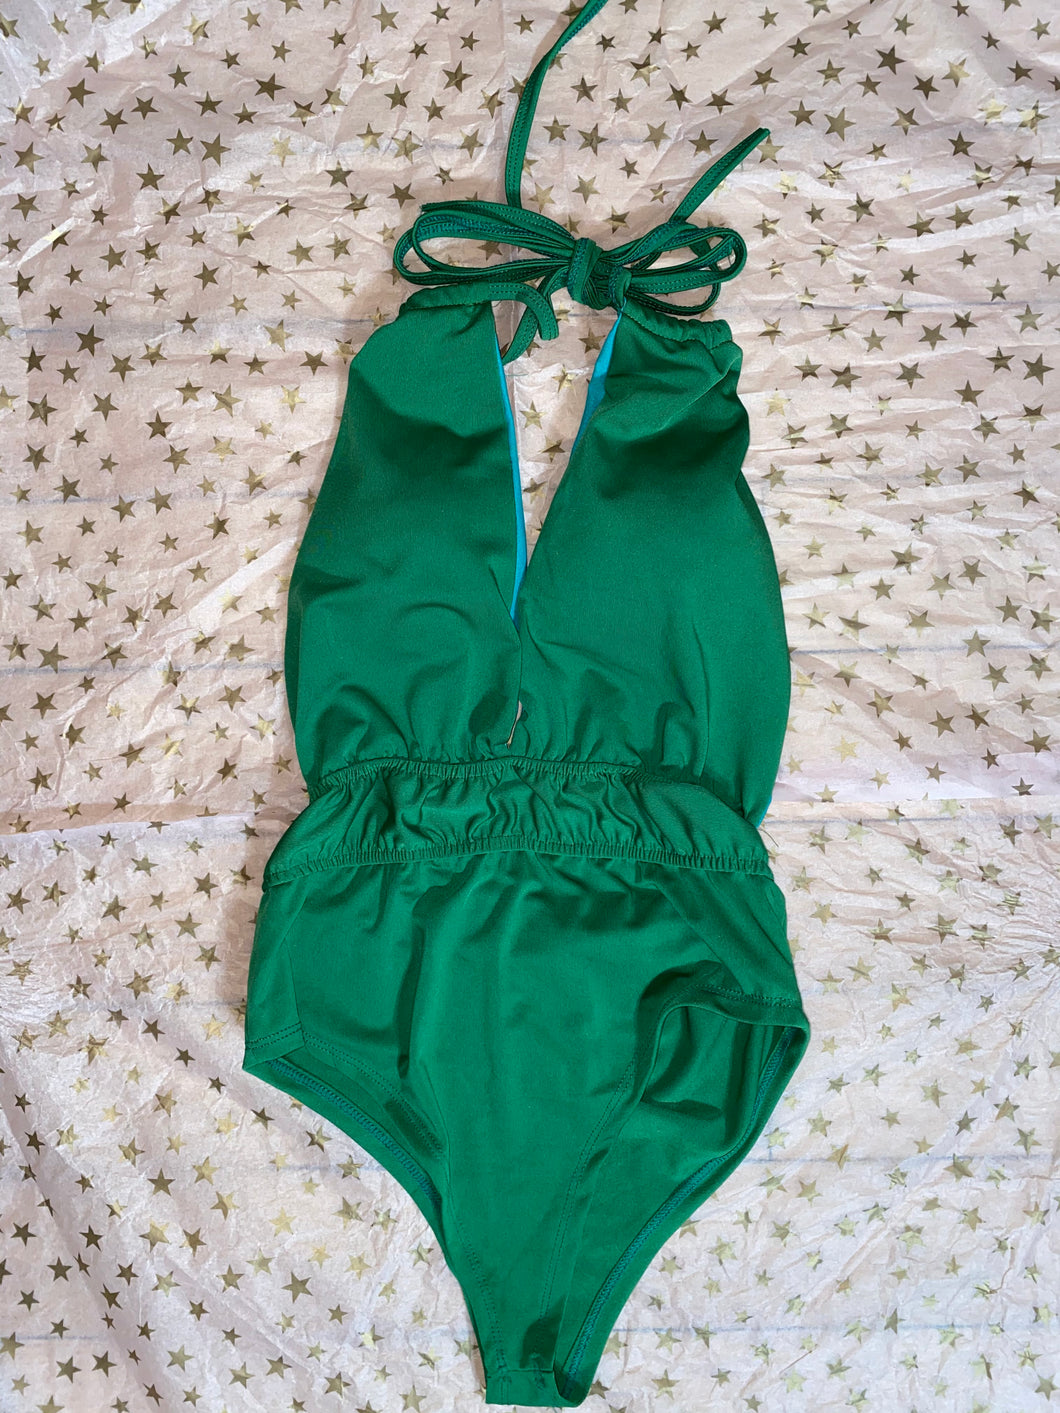 Green one piece swimsuit